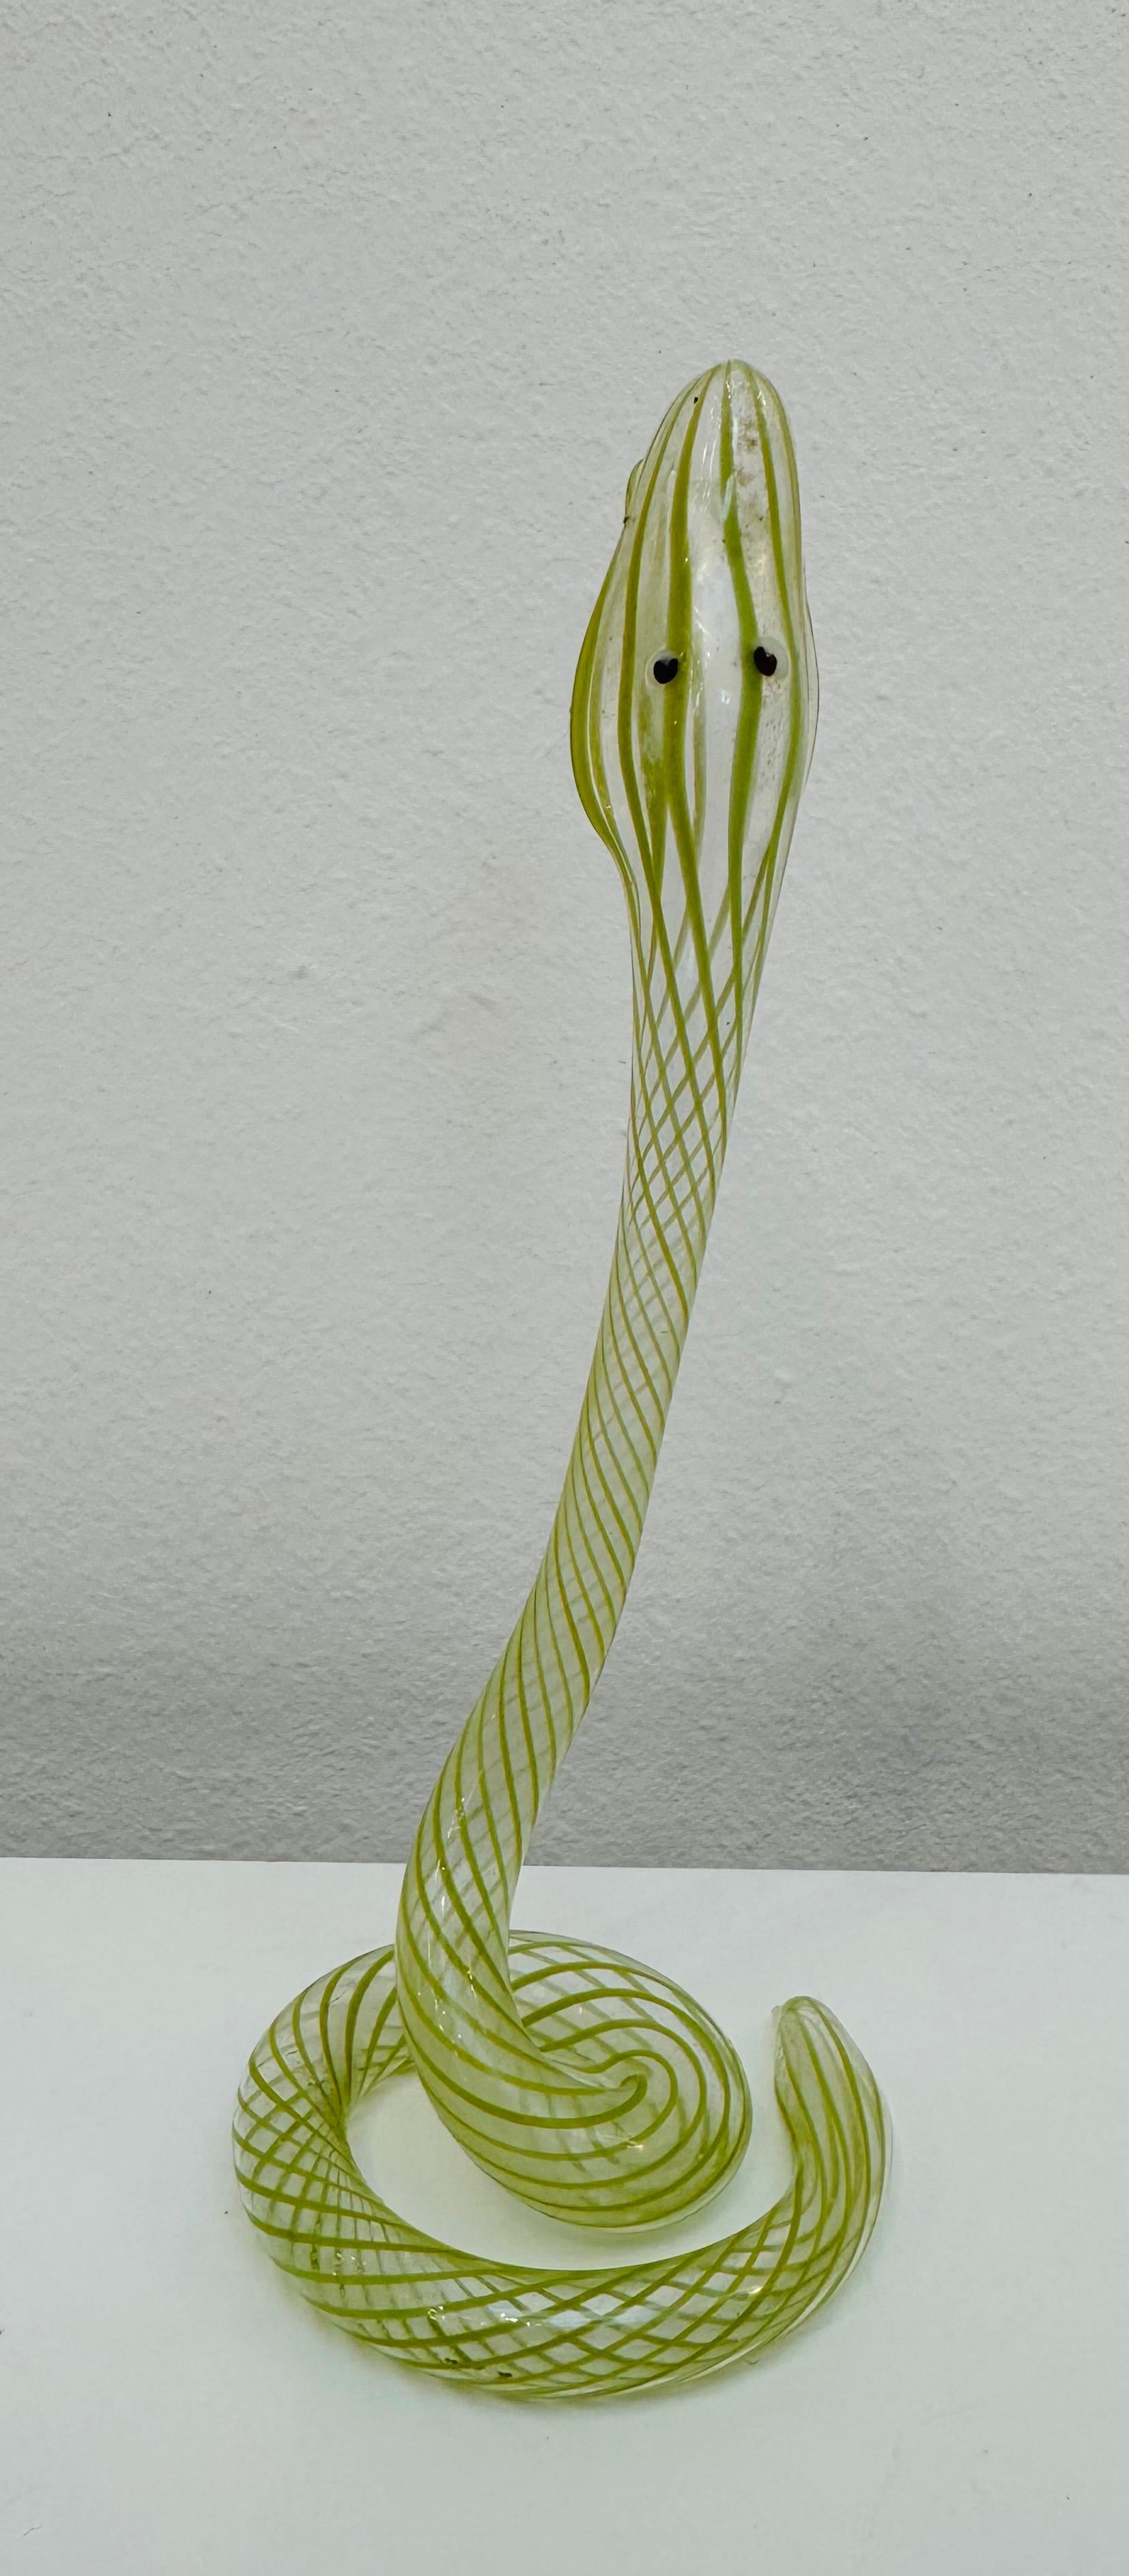 Mid-20th Century 1930s Art Deco Bimini or Lauscha Lampworked Lime Green Striped Snake Glass Vase